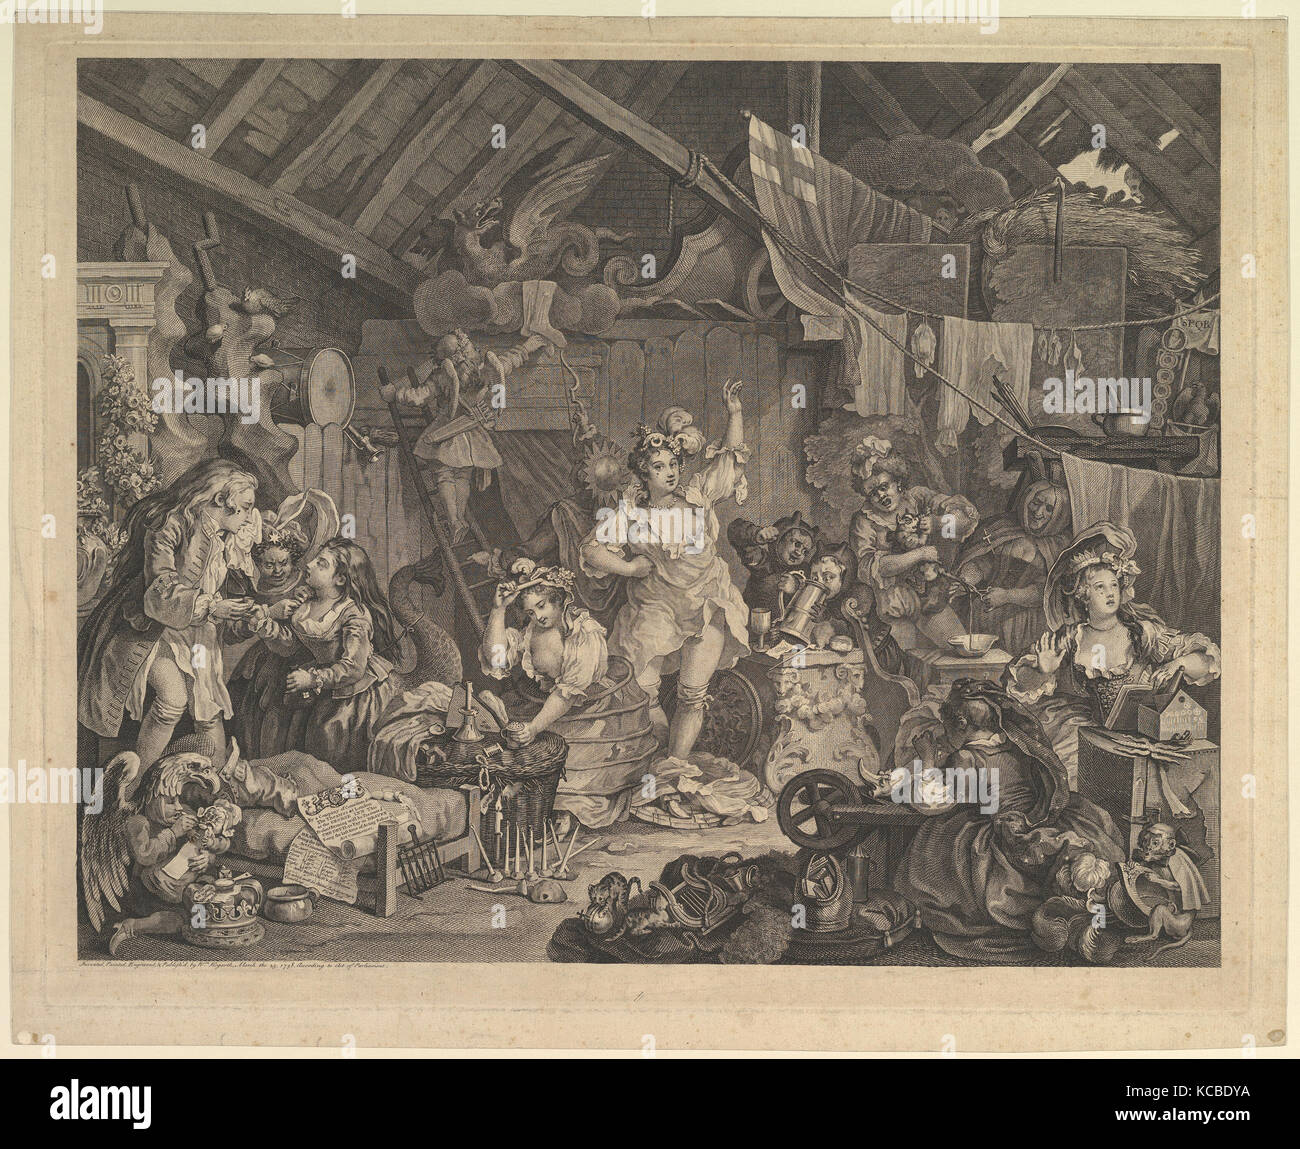 Strolling Actresses Dressing in a Barn, William Hogarth, 1738 Stock Photo